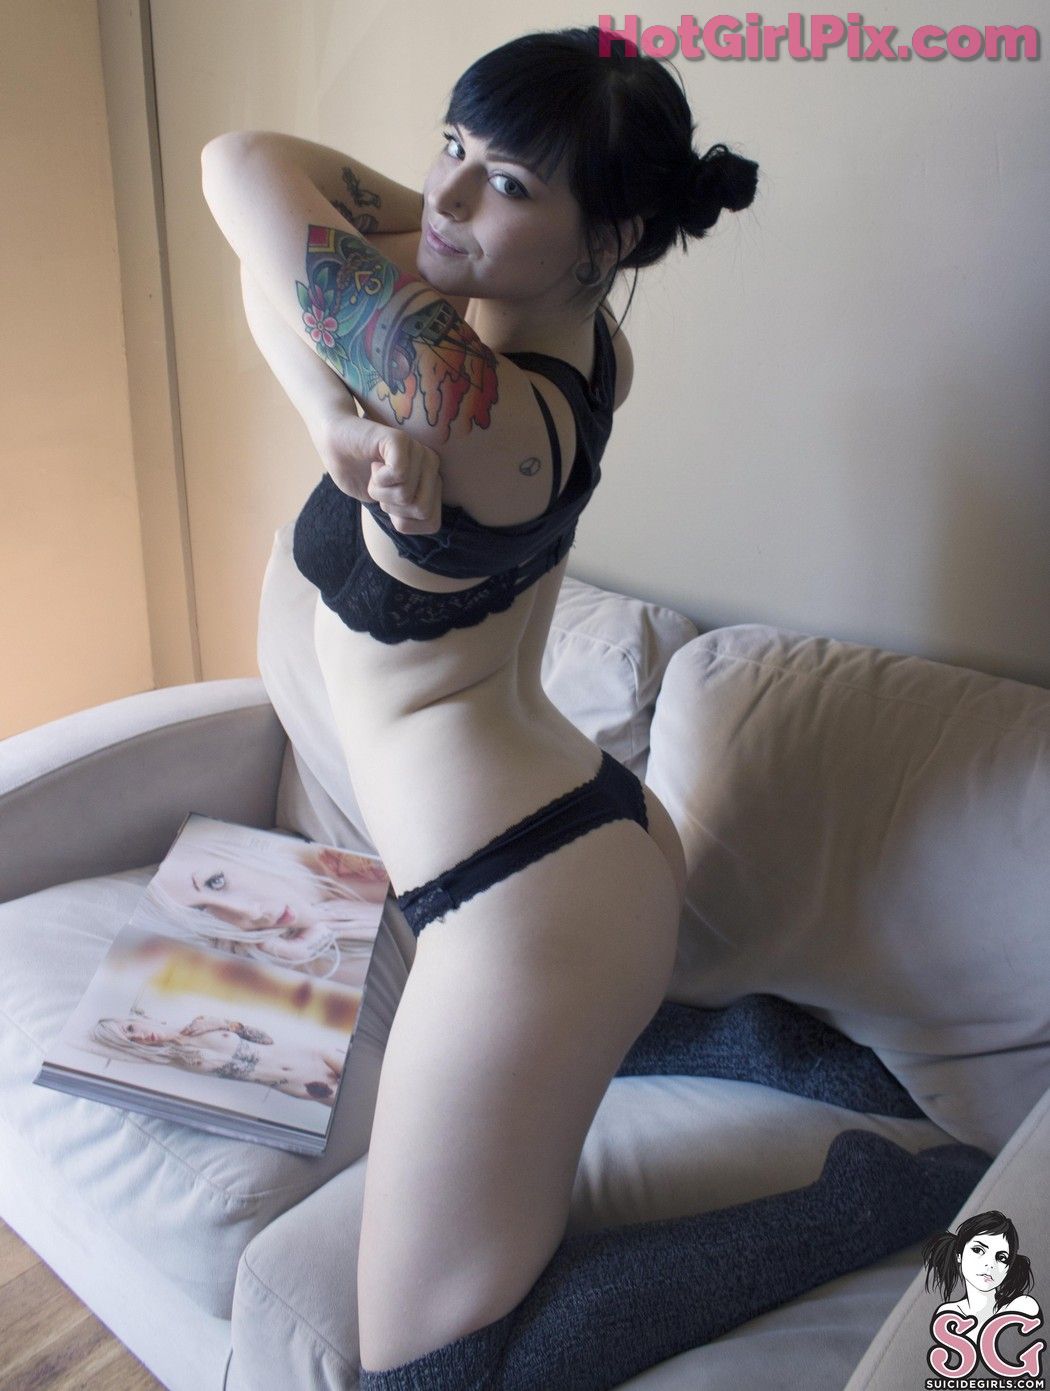 [Suicide Girls] Ceres - The Very Thought of You